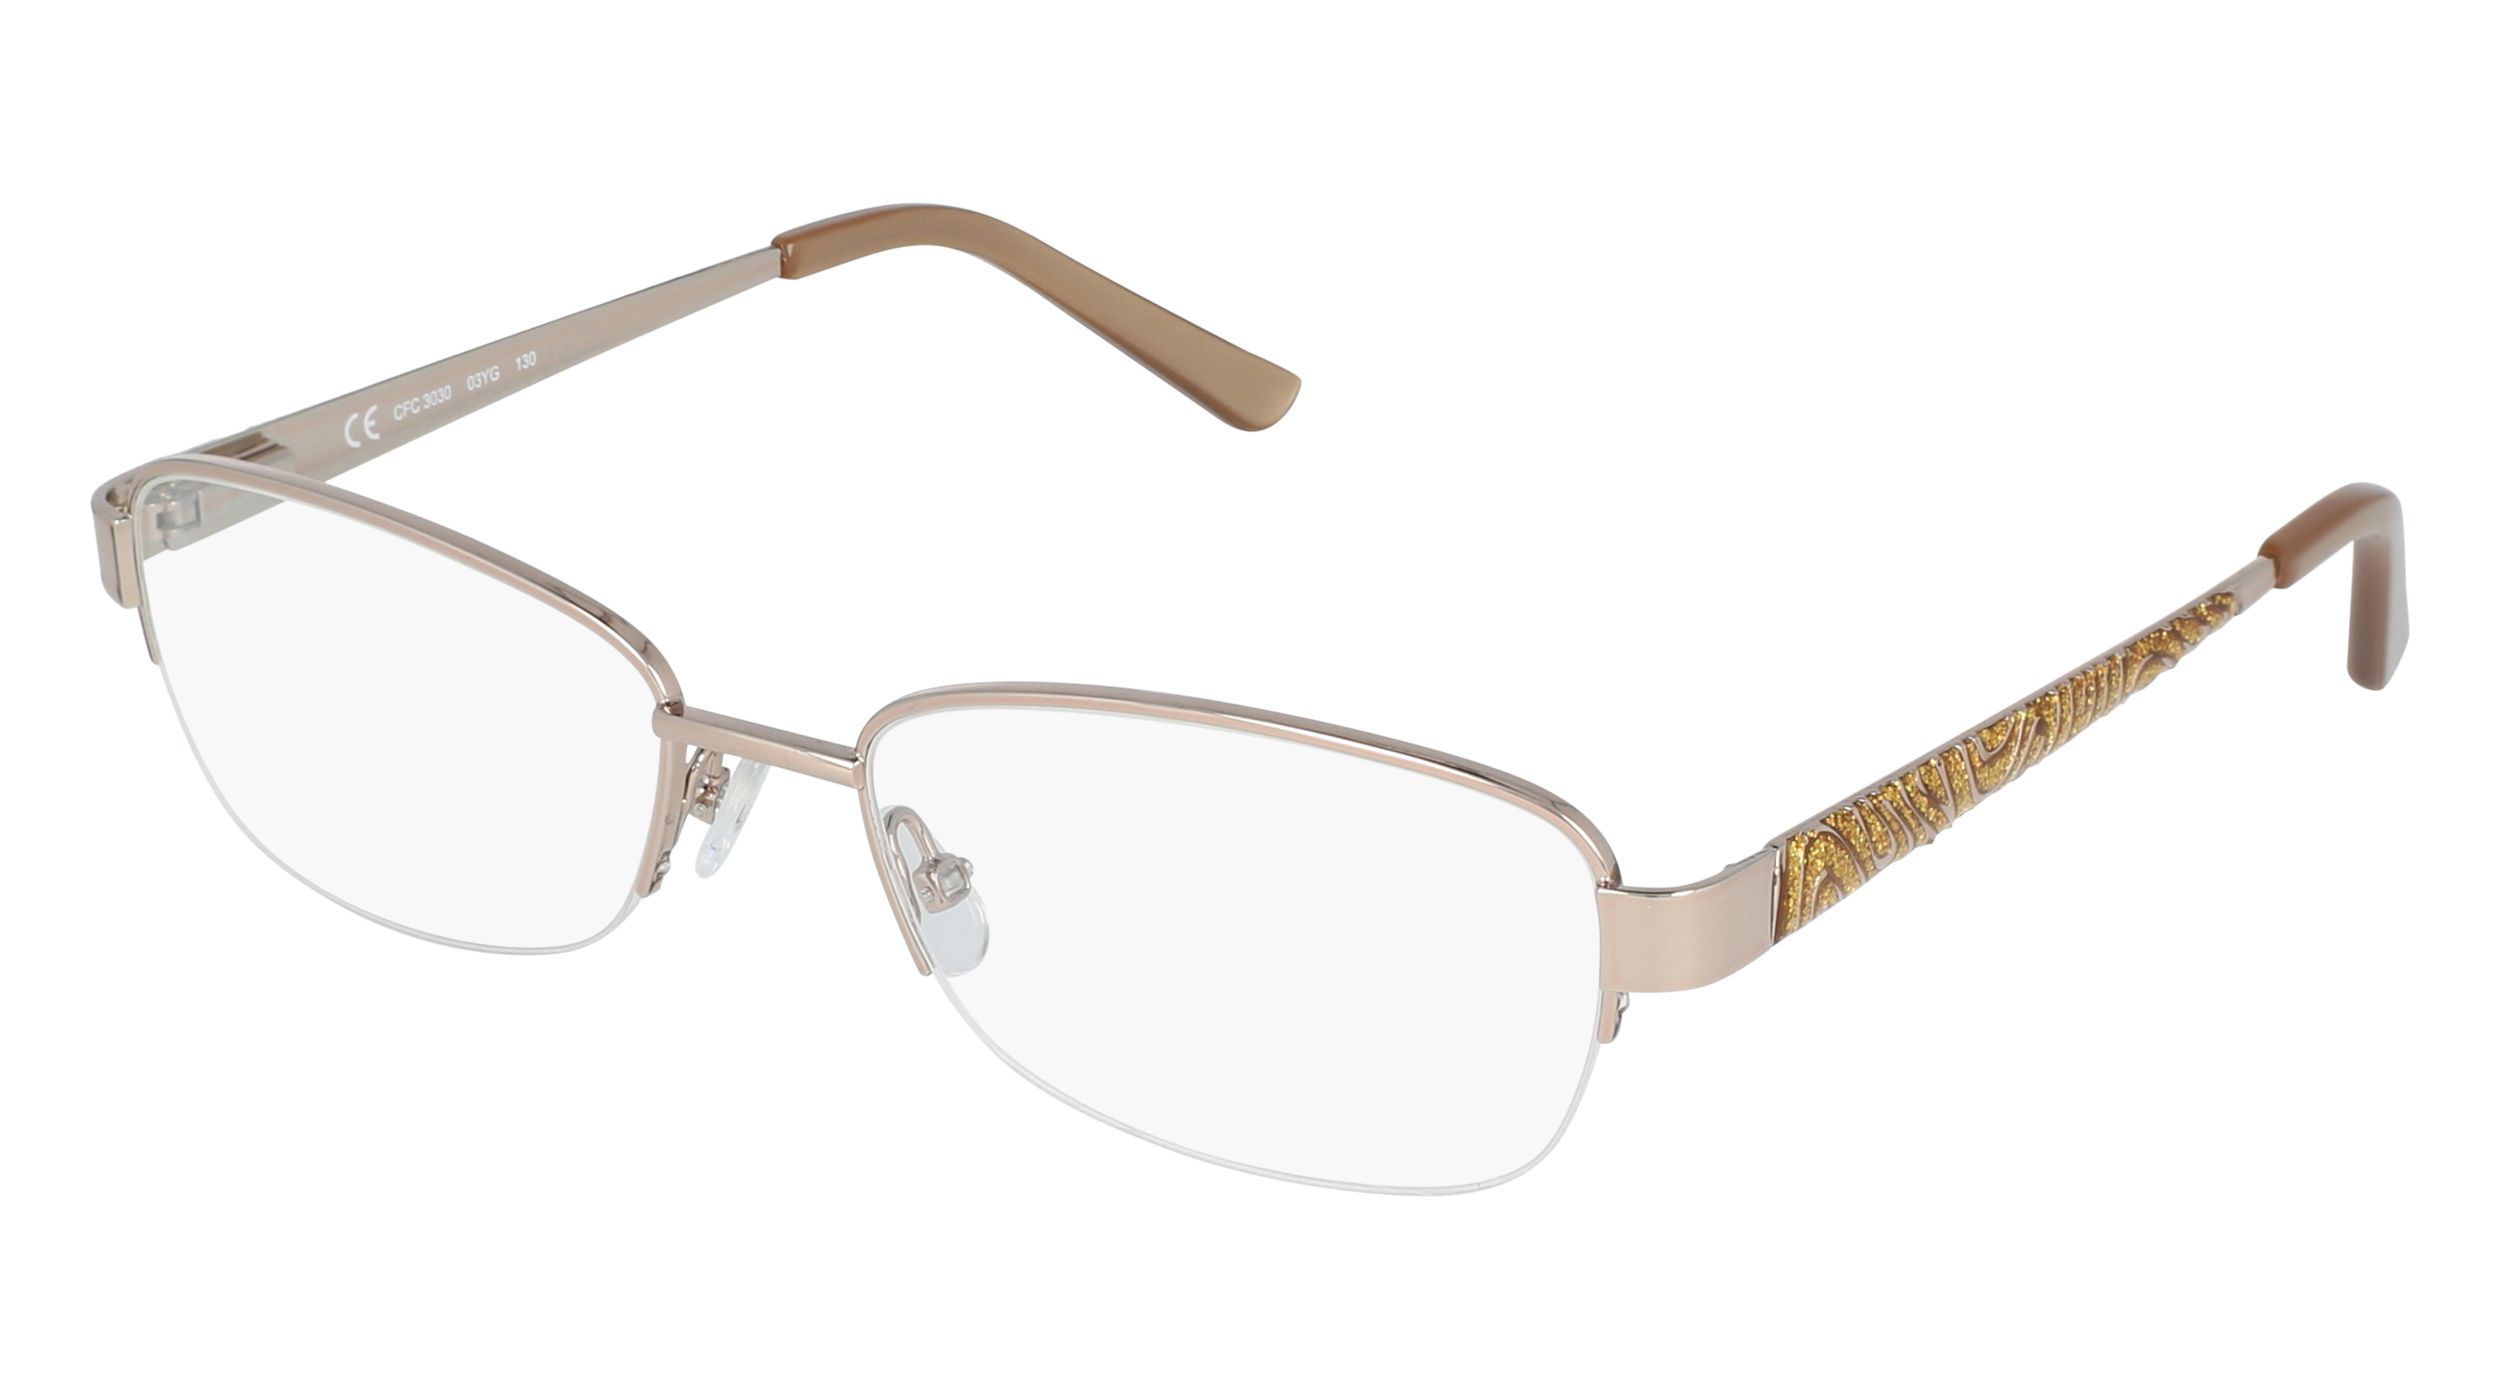 L CFC 3030 women's eyeglasses (from the side)